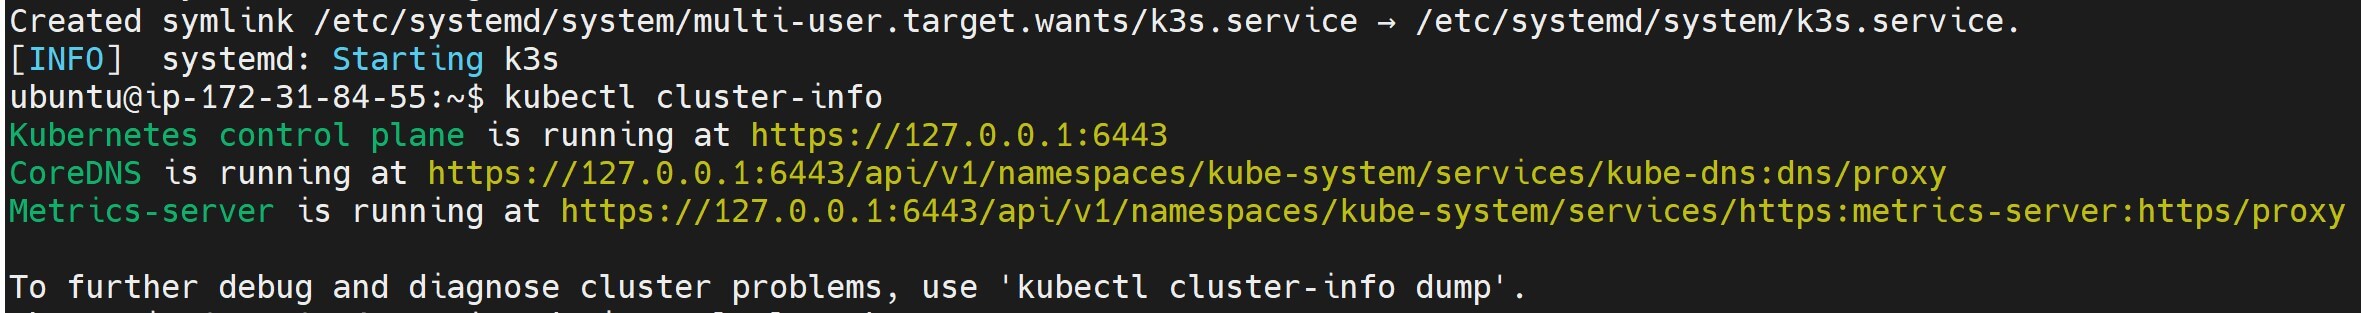 Accessing K3s Logs Using Systemd Journal